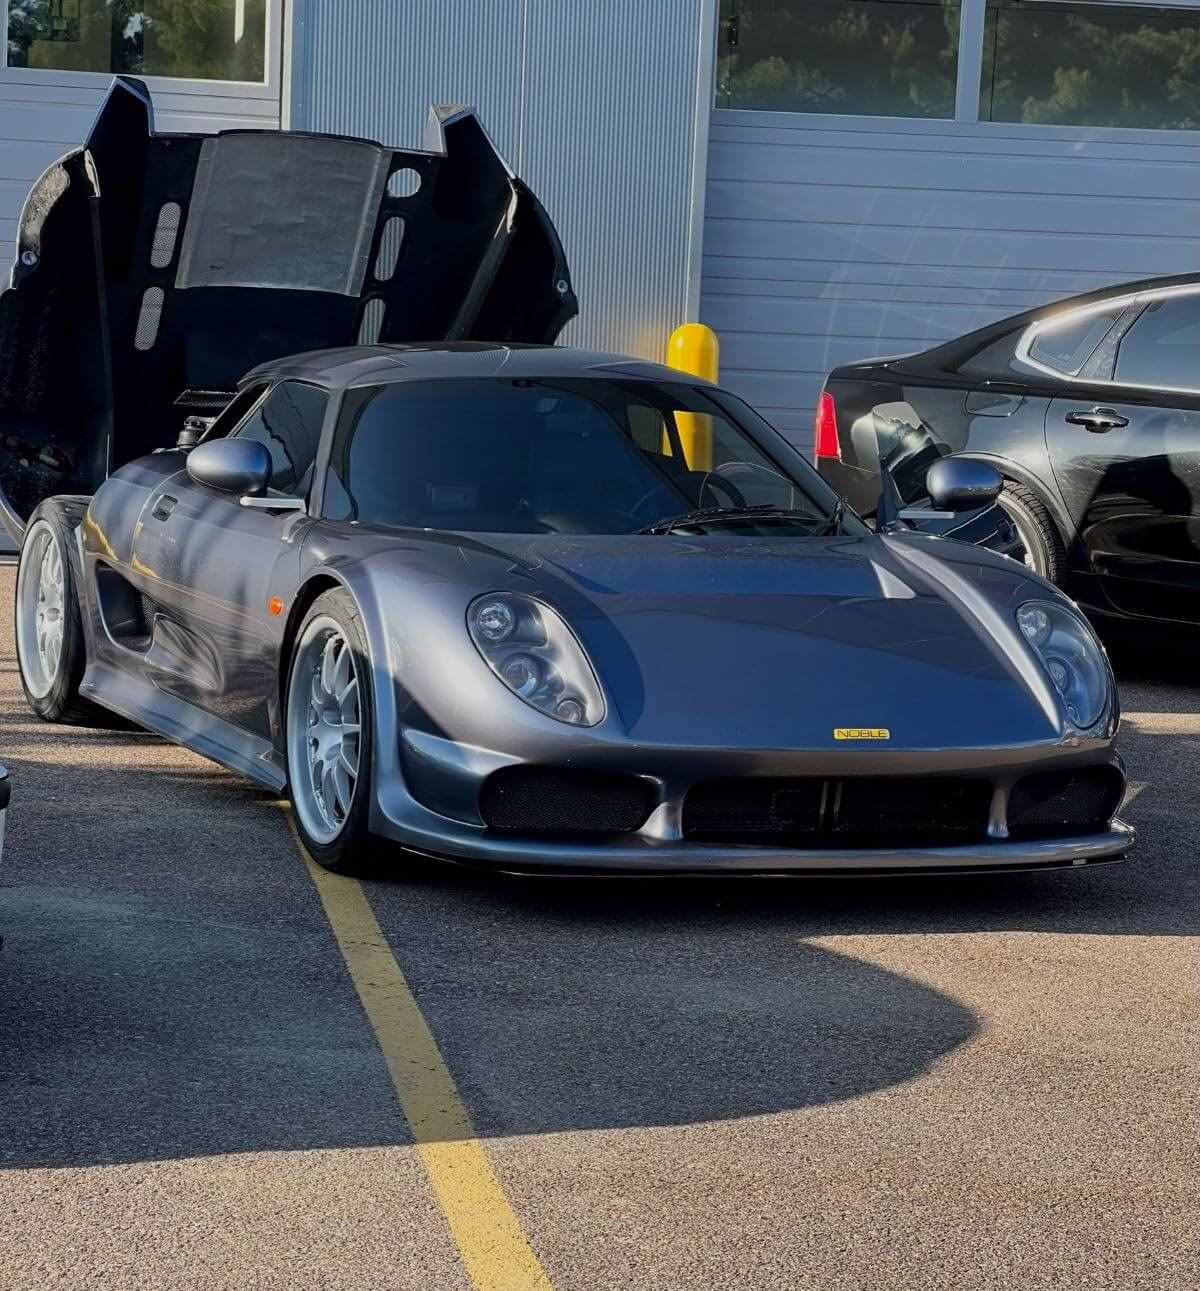 Noble M12 parked with its engine cover open